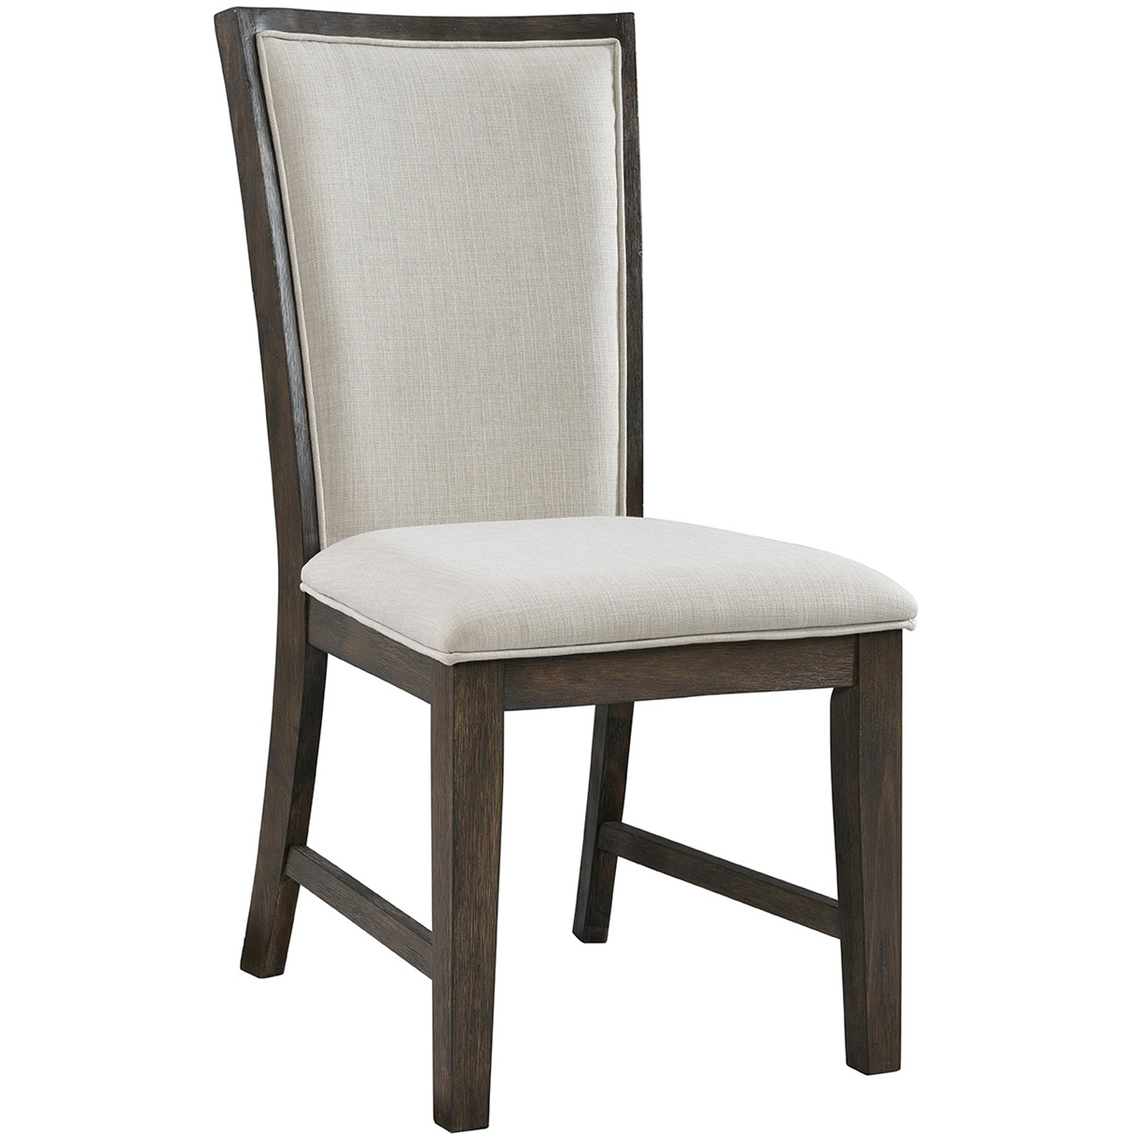 Elements Grady 7 pc. Dining Set with Slat Back Chair - Image 3 of 8